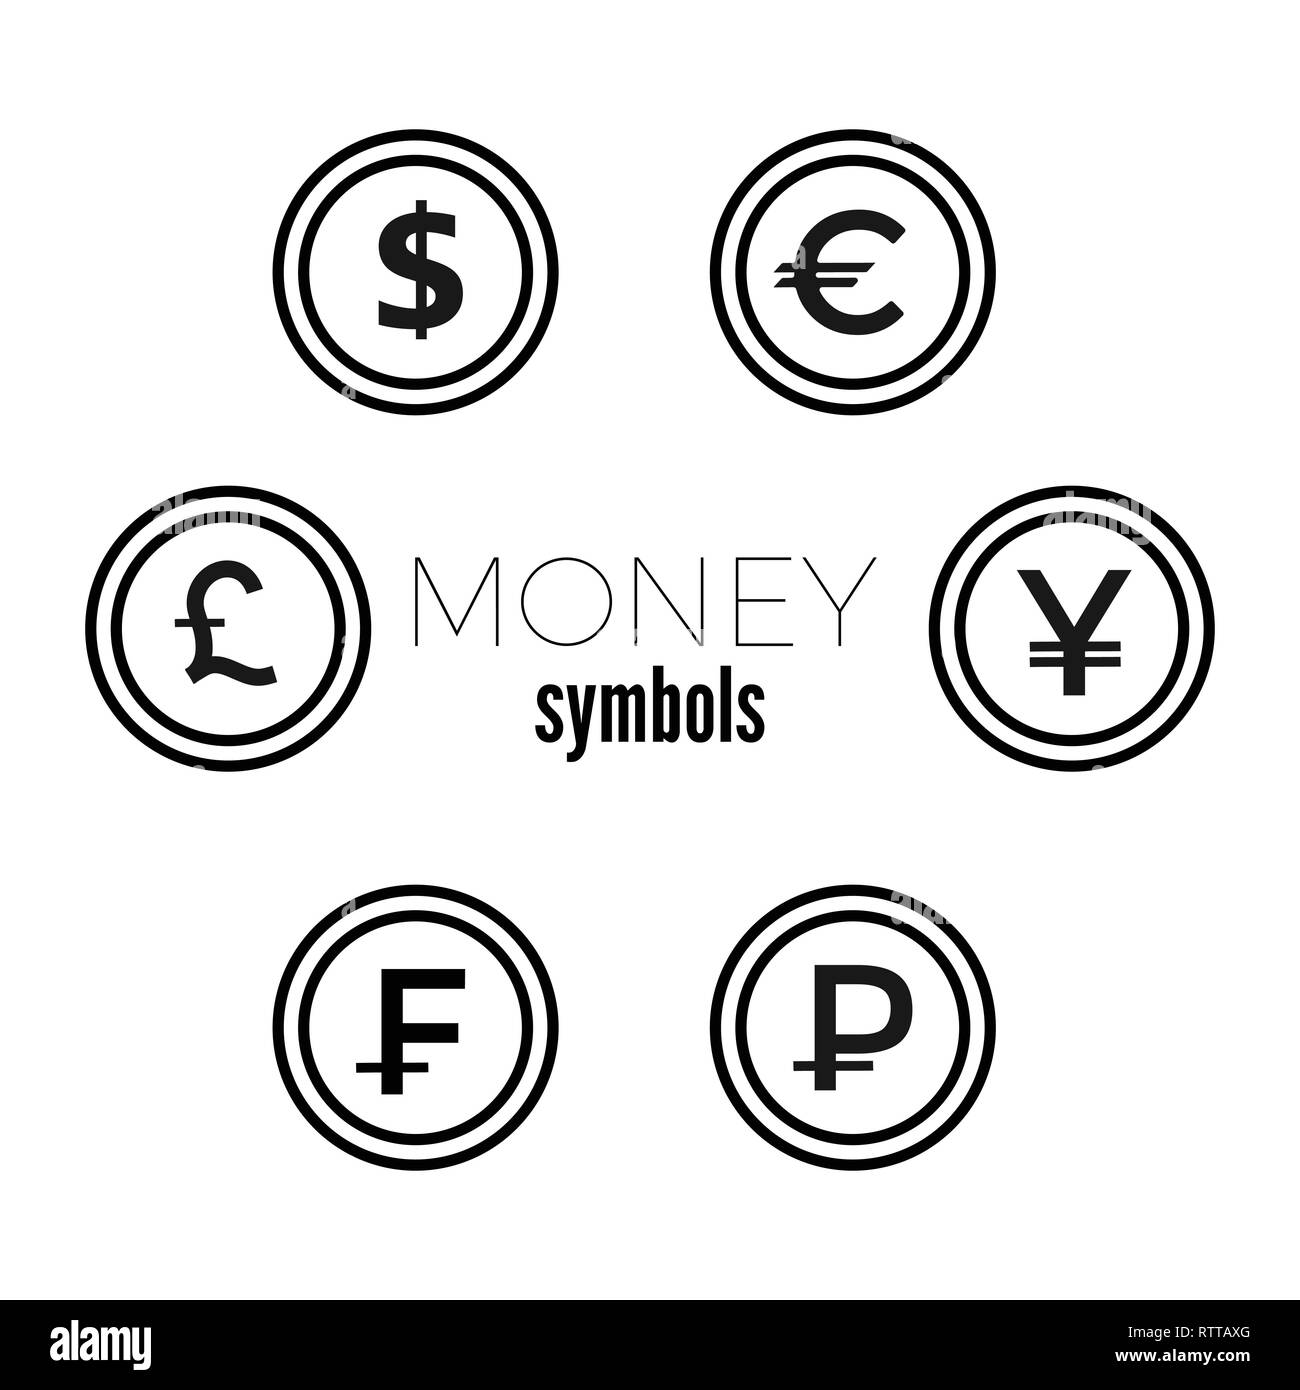 Dollar, Euro, Pound, Yuan Rouble and frank currency icons. USD, EUR, GBP, CNY, CHF, RUB money sign symbols. Flat icon pointers. Stock Vector